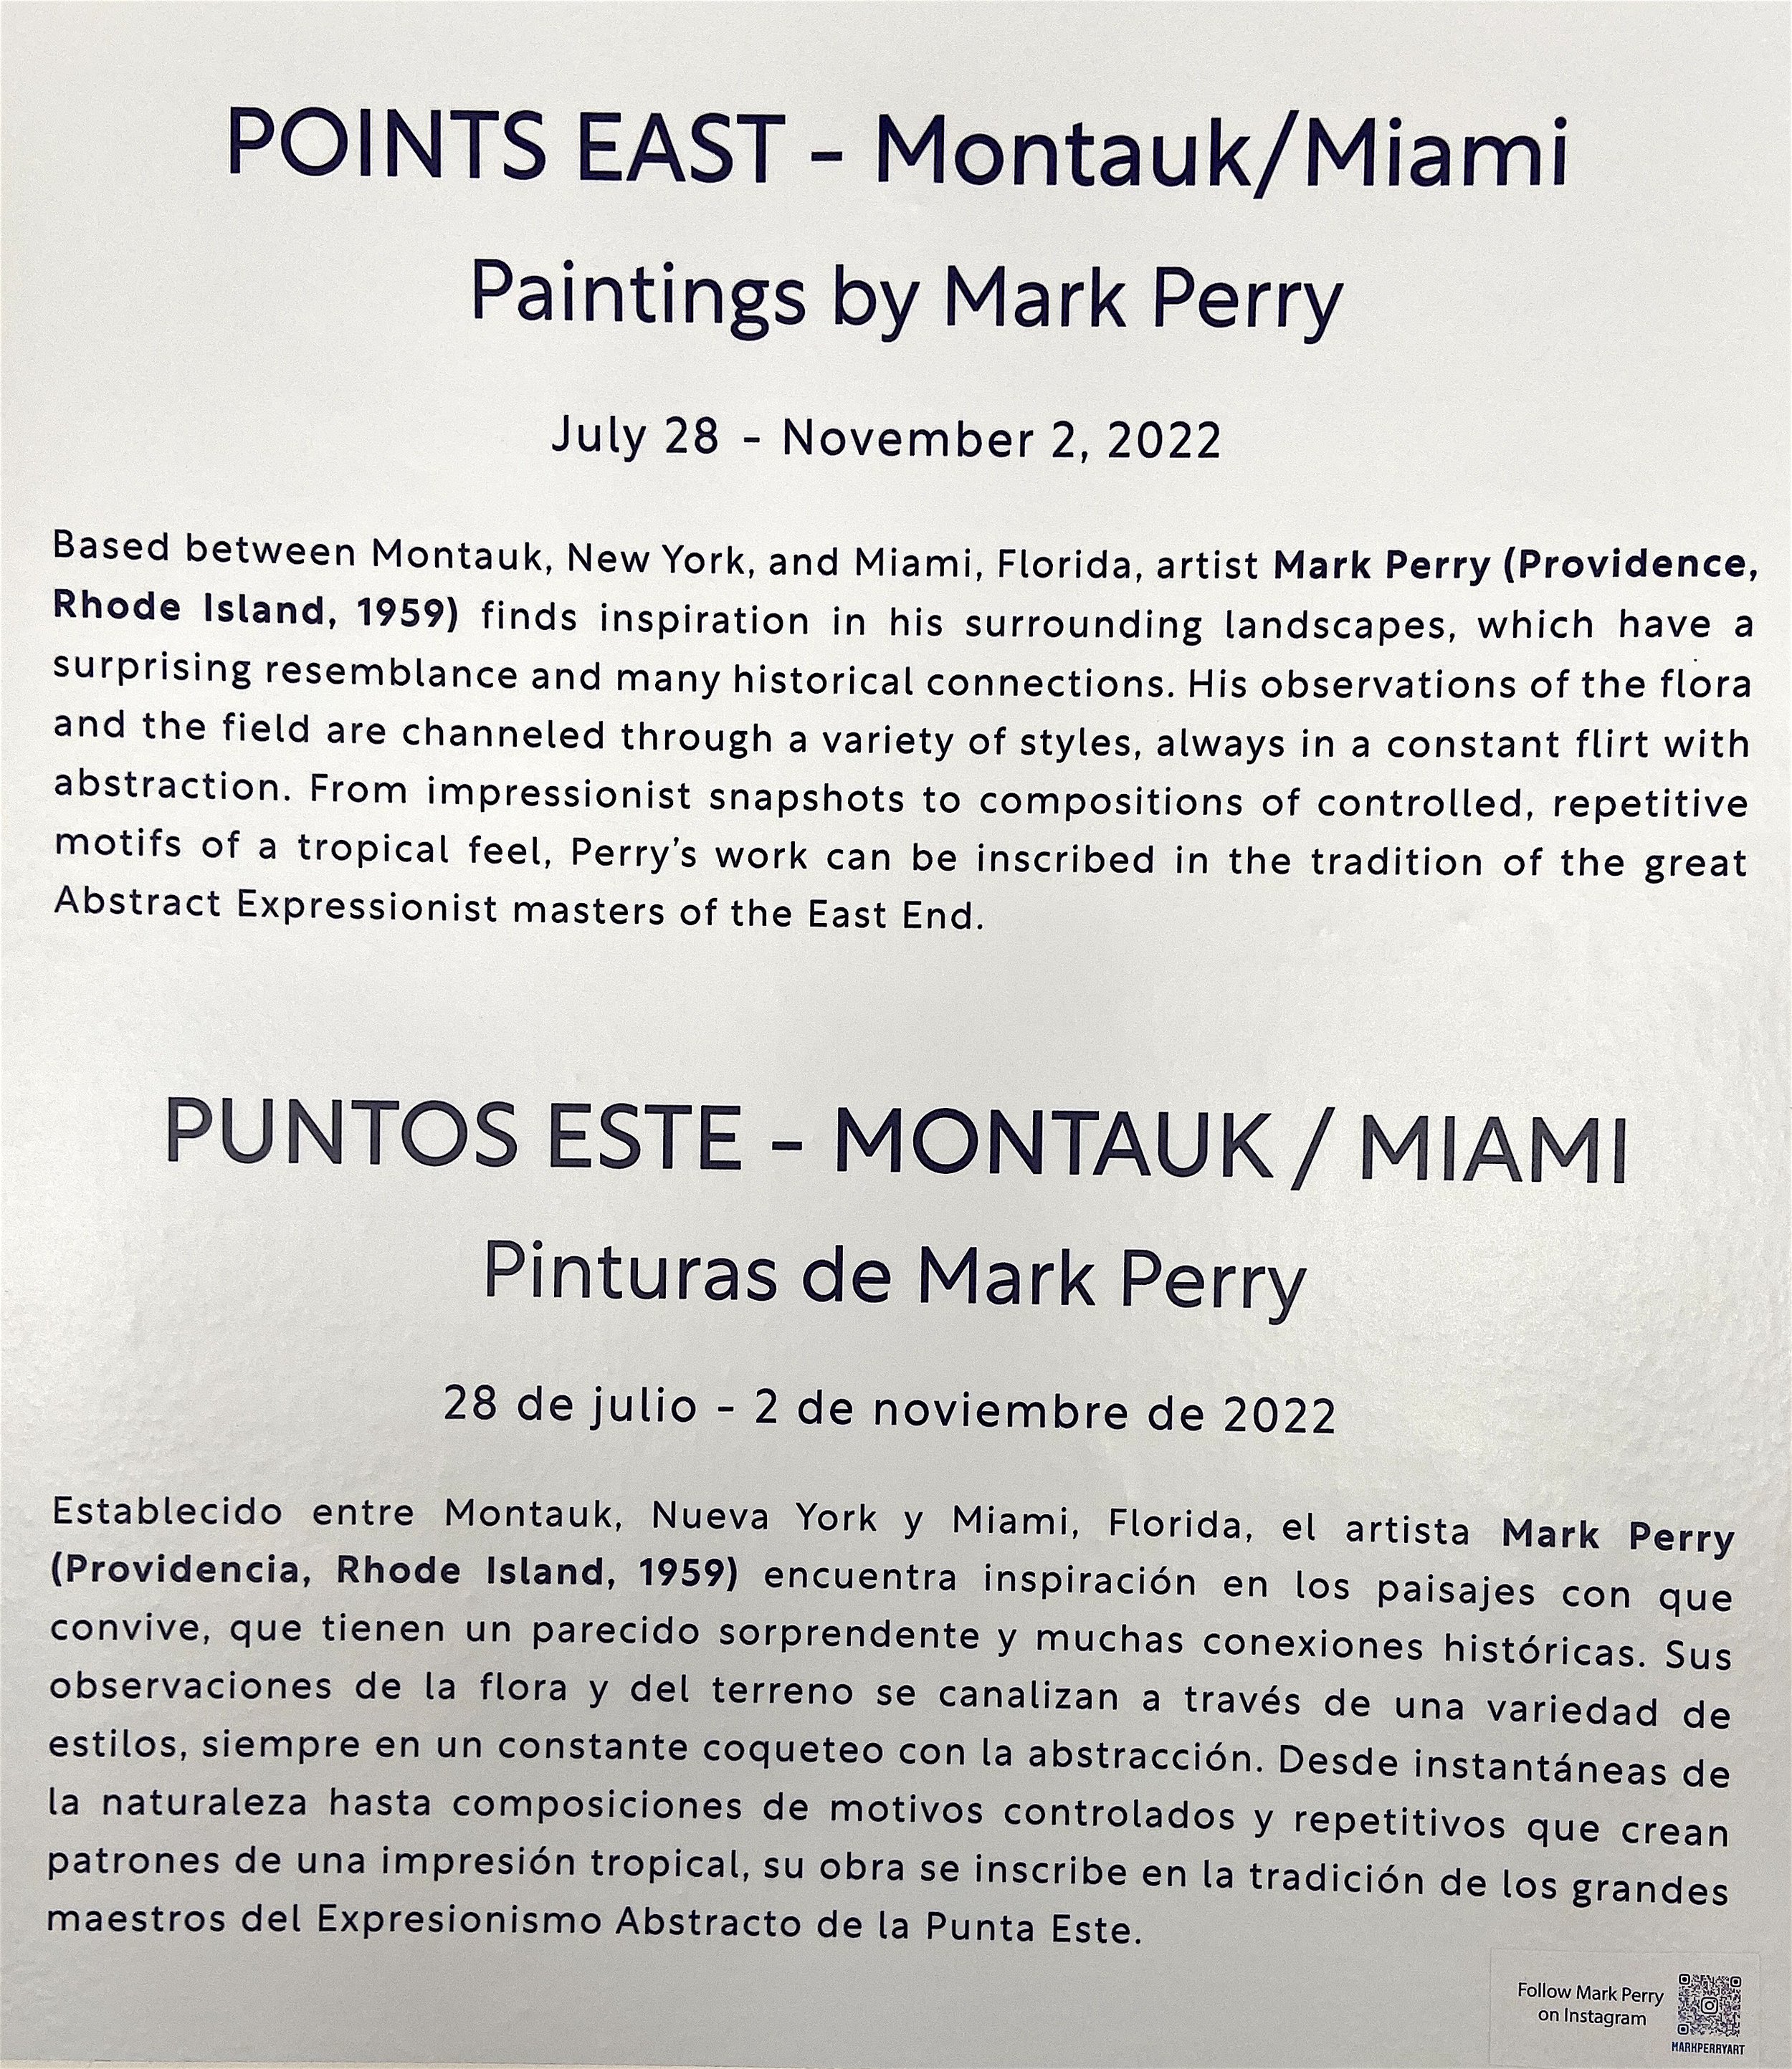 Points East - Montauk / Miami, Paintings of Mark Perry